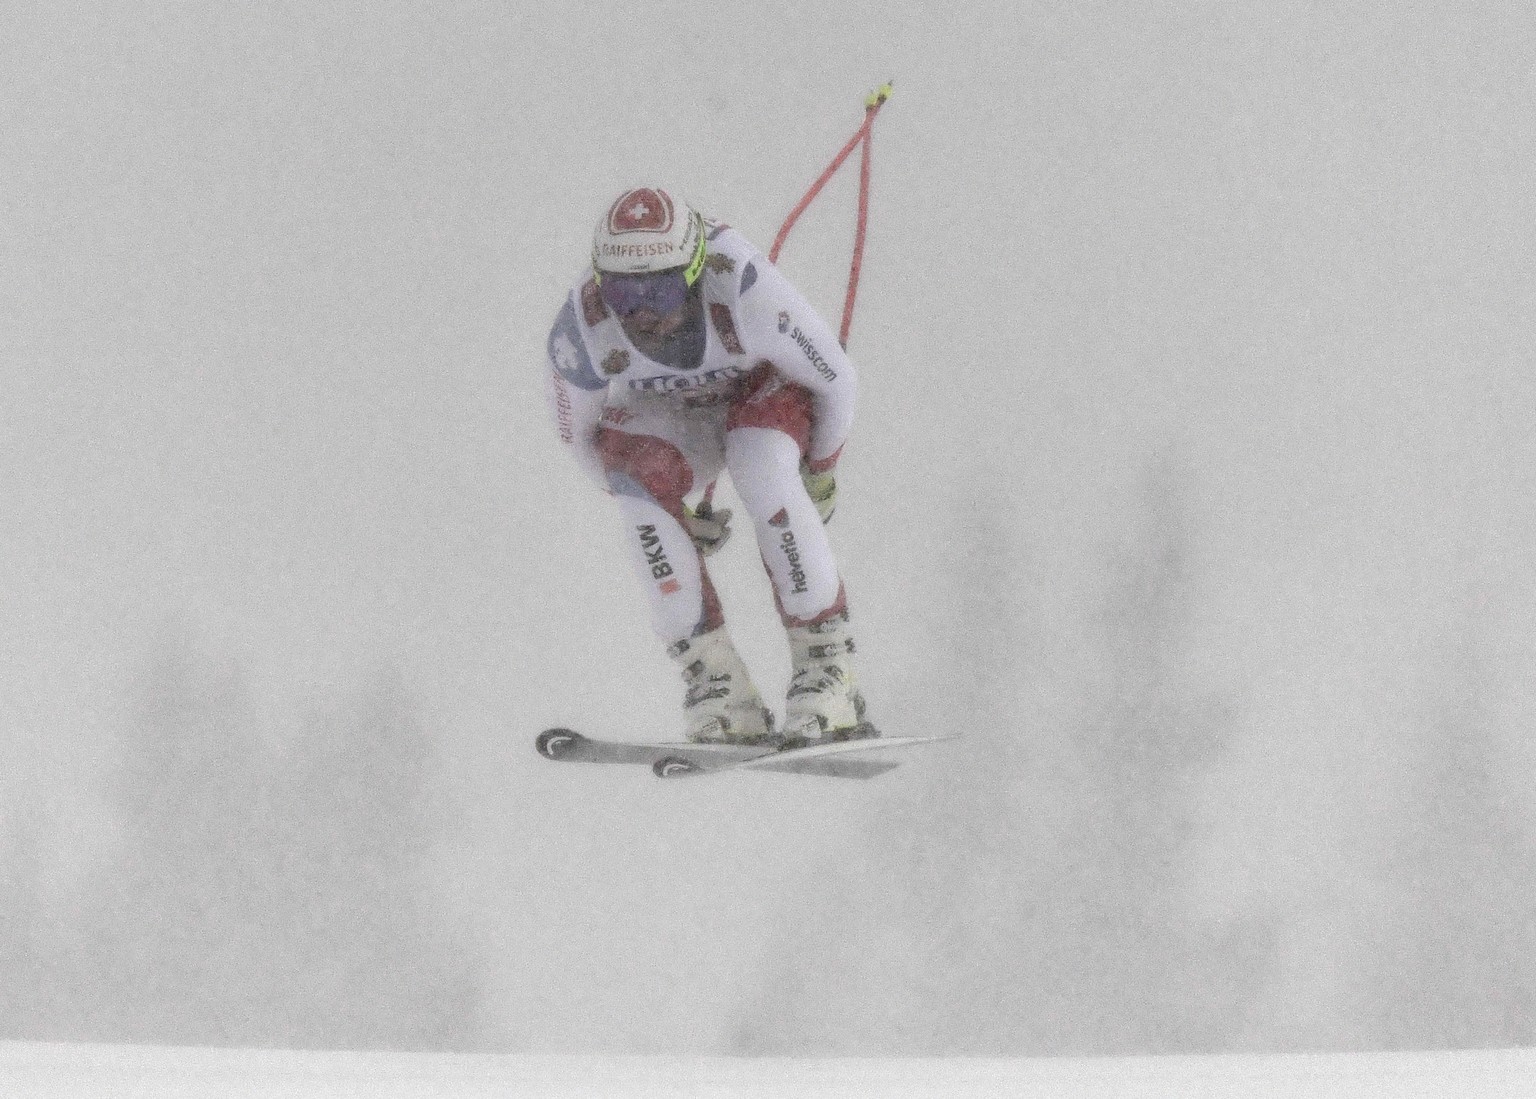 epa07355133 Beat Feuz of Switzerland speeds down the slope during the Men&#039;s Downhill race at the FIS Alpine Skiing World Championships in Are, Sweden, 09 February 2019. EPA/CHRISTIAN BRUNA